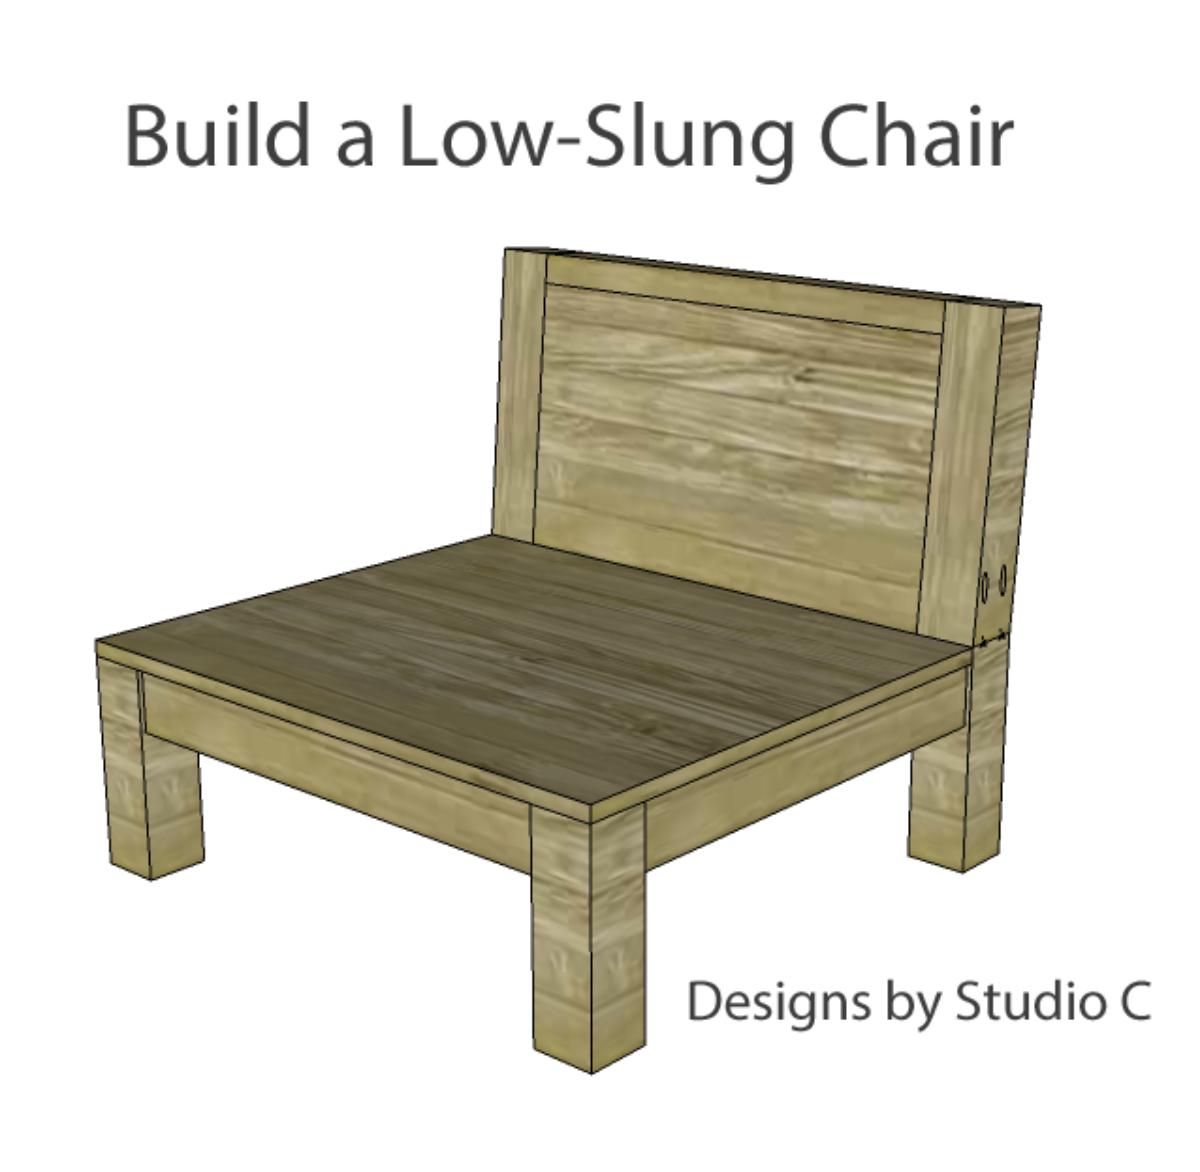 Wooden Low-Slung Chair plan.